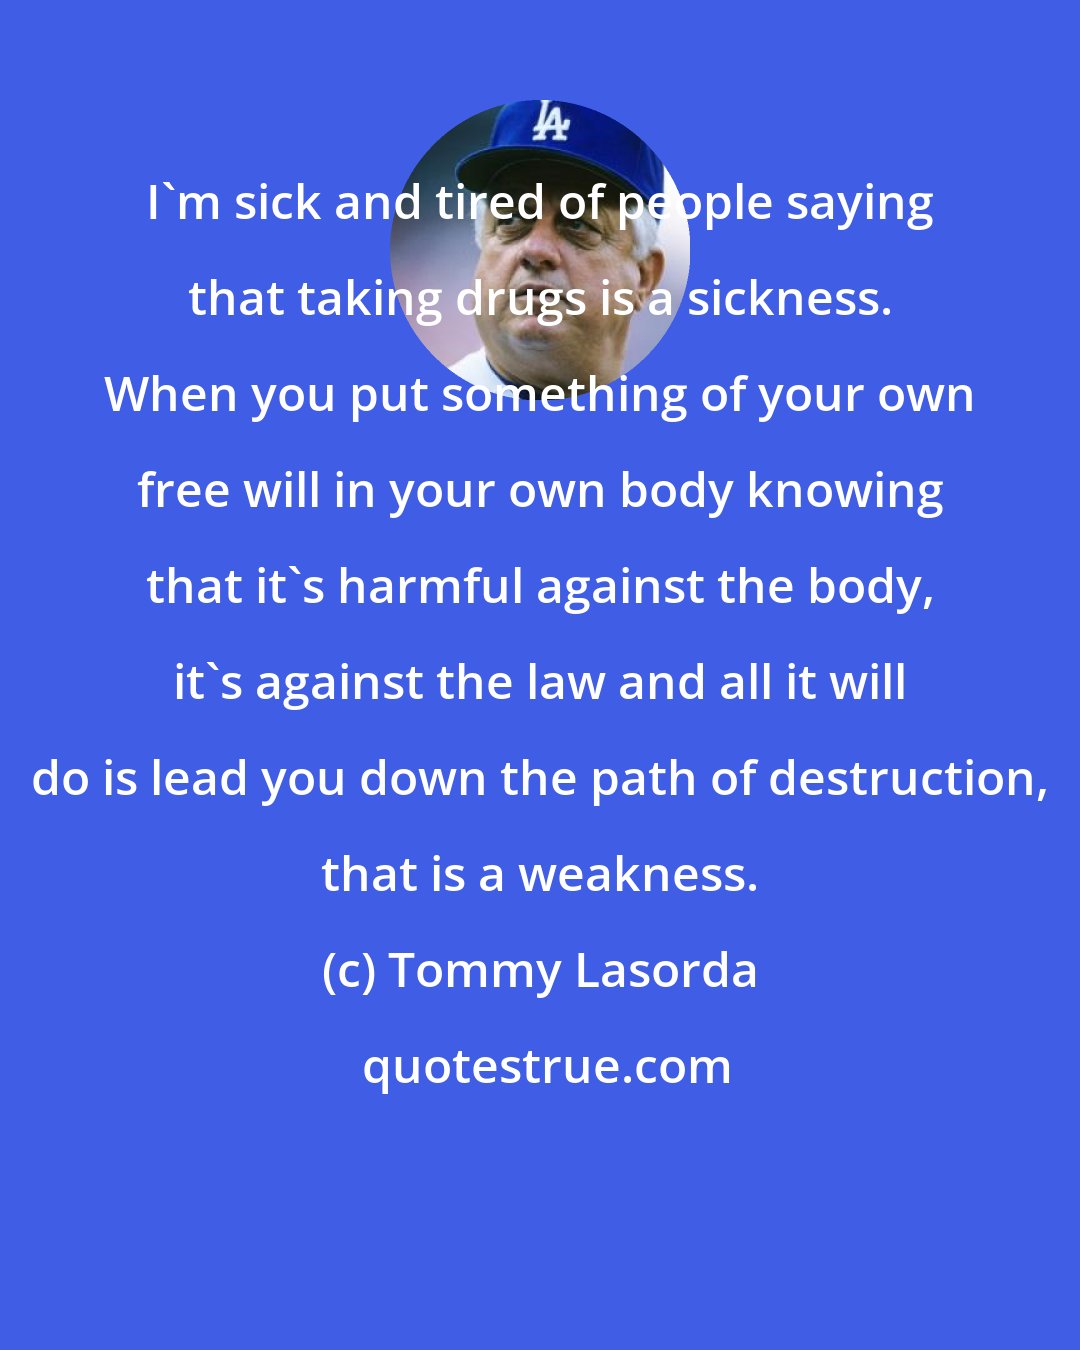 Tommy Lasorda: I'm sick and tired of people saying that taking drugs is a sickness. When you put something of your own free will in your own body knowing that it's harmful against the body, it's against the law and all it will do is lead you down the path of destruction, that is a weakness.